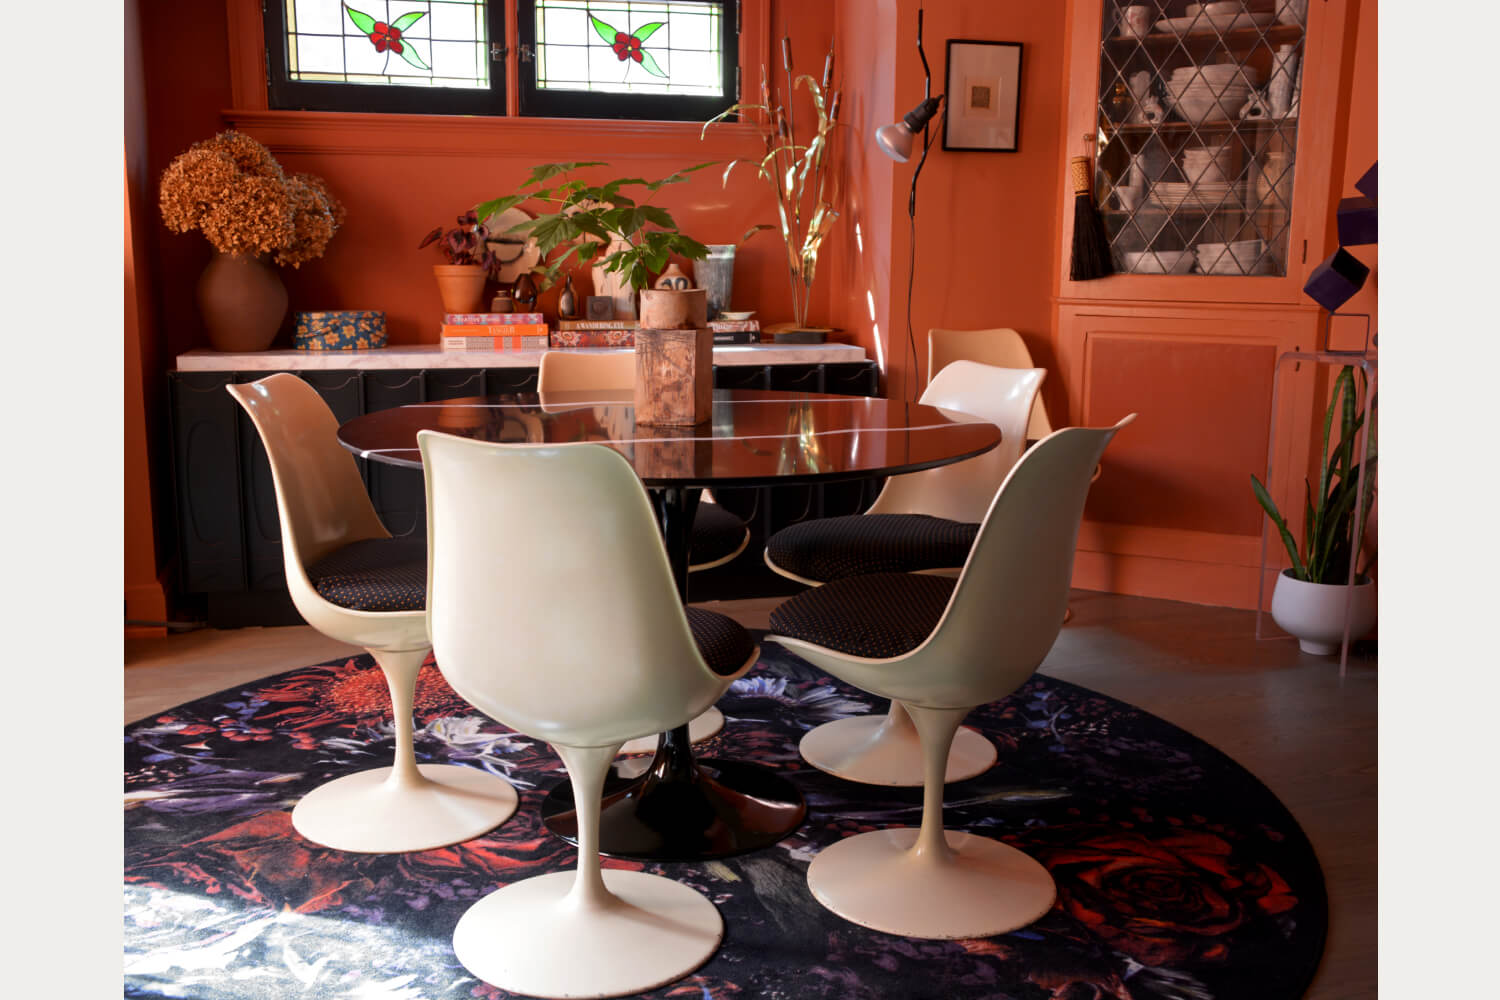 Energizing work or dining space with vibrant color tones.